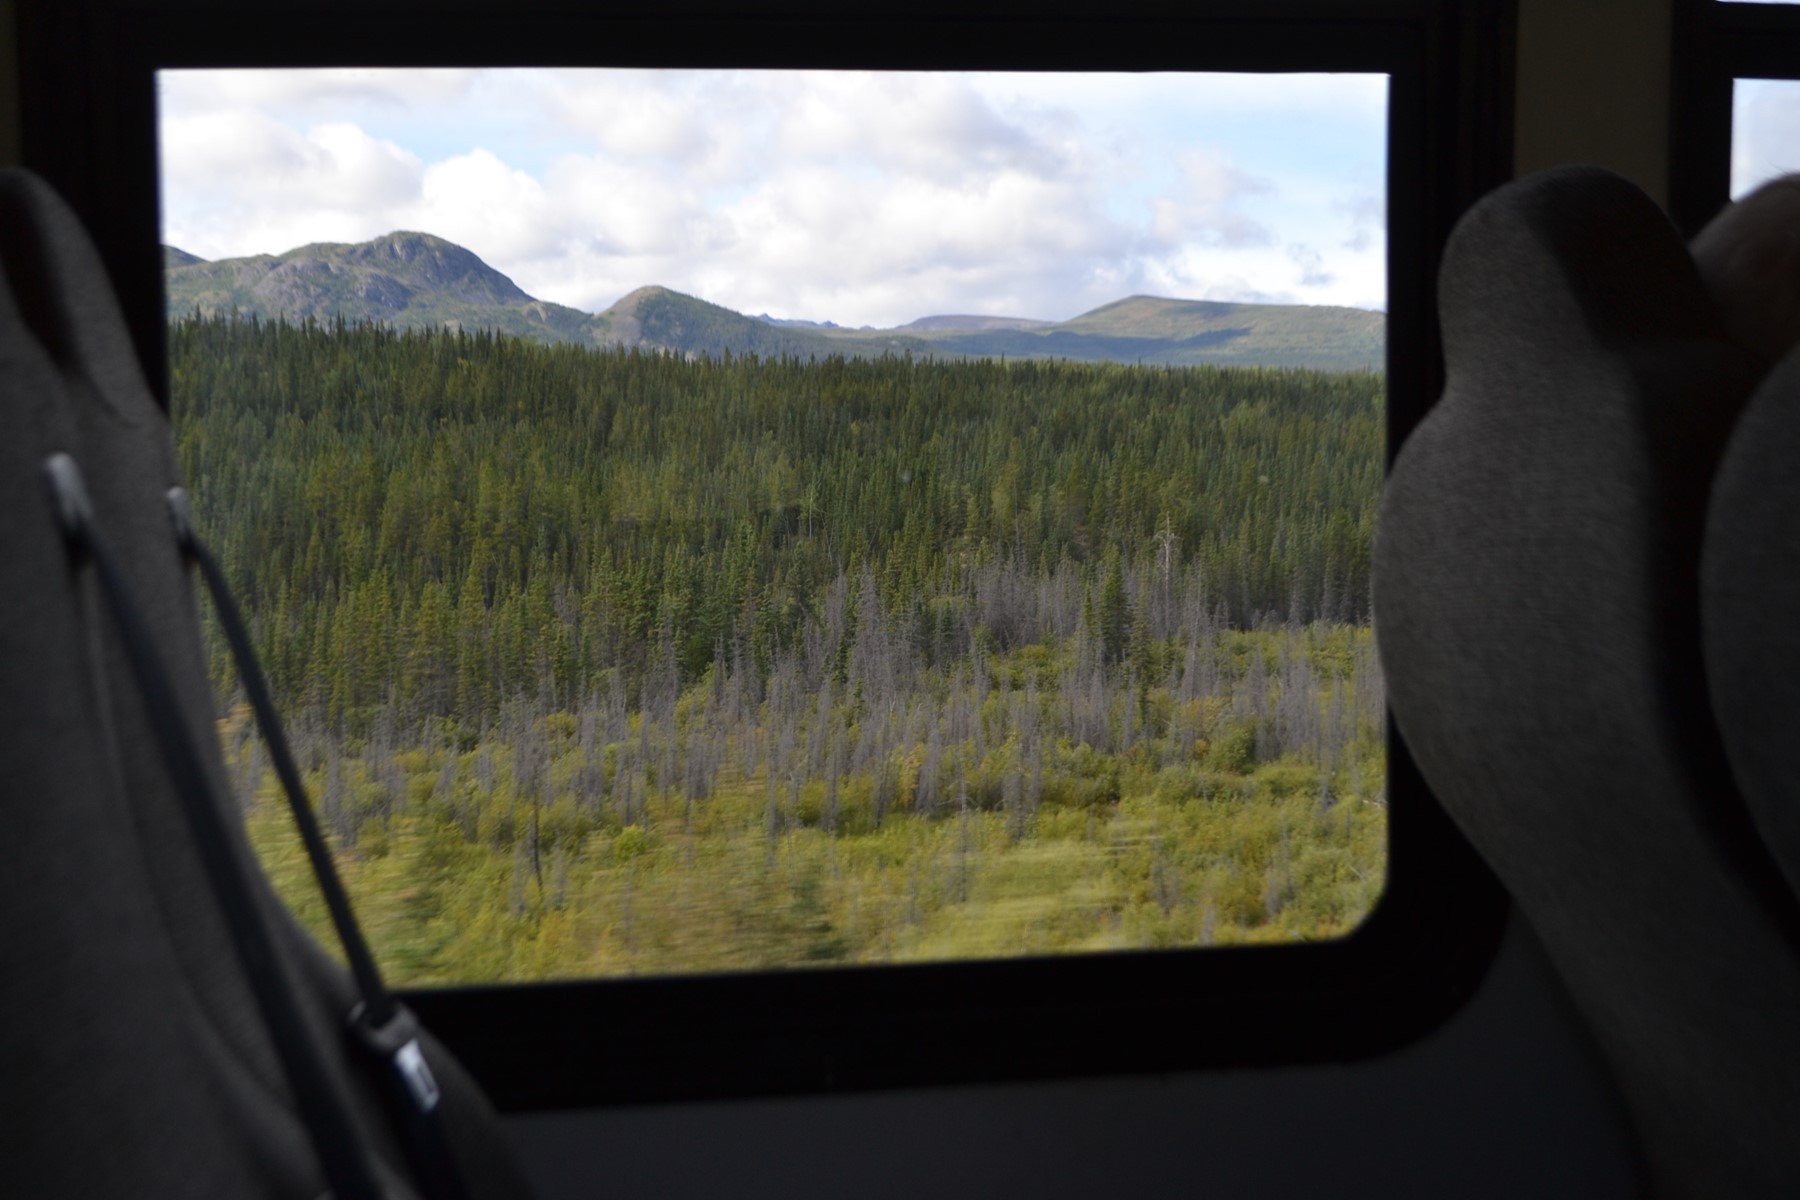 View from bus window, dense conifer forest with mountains in distance